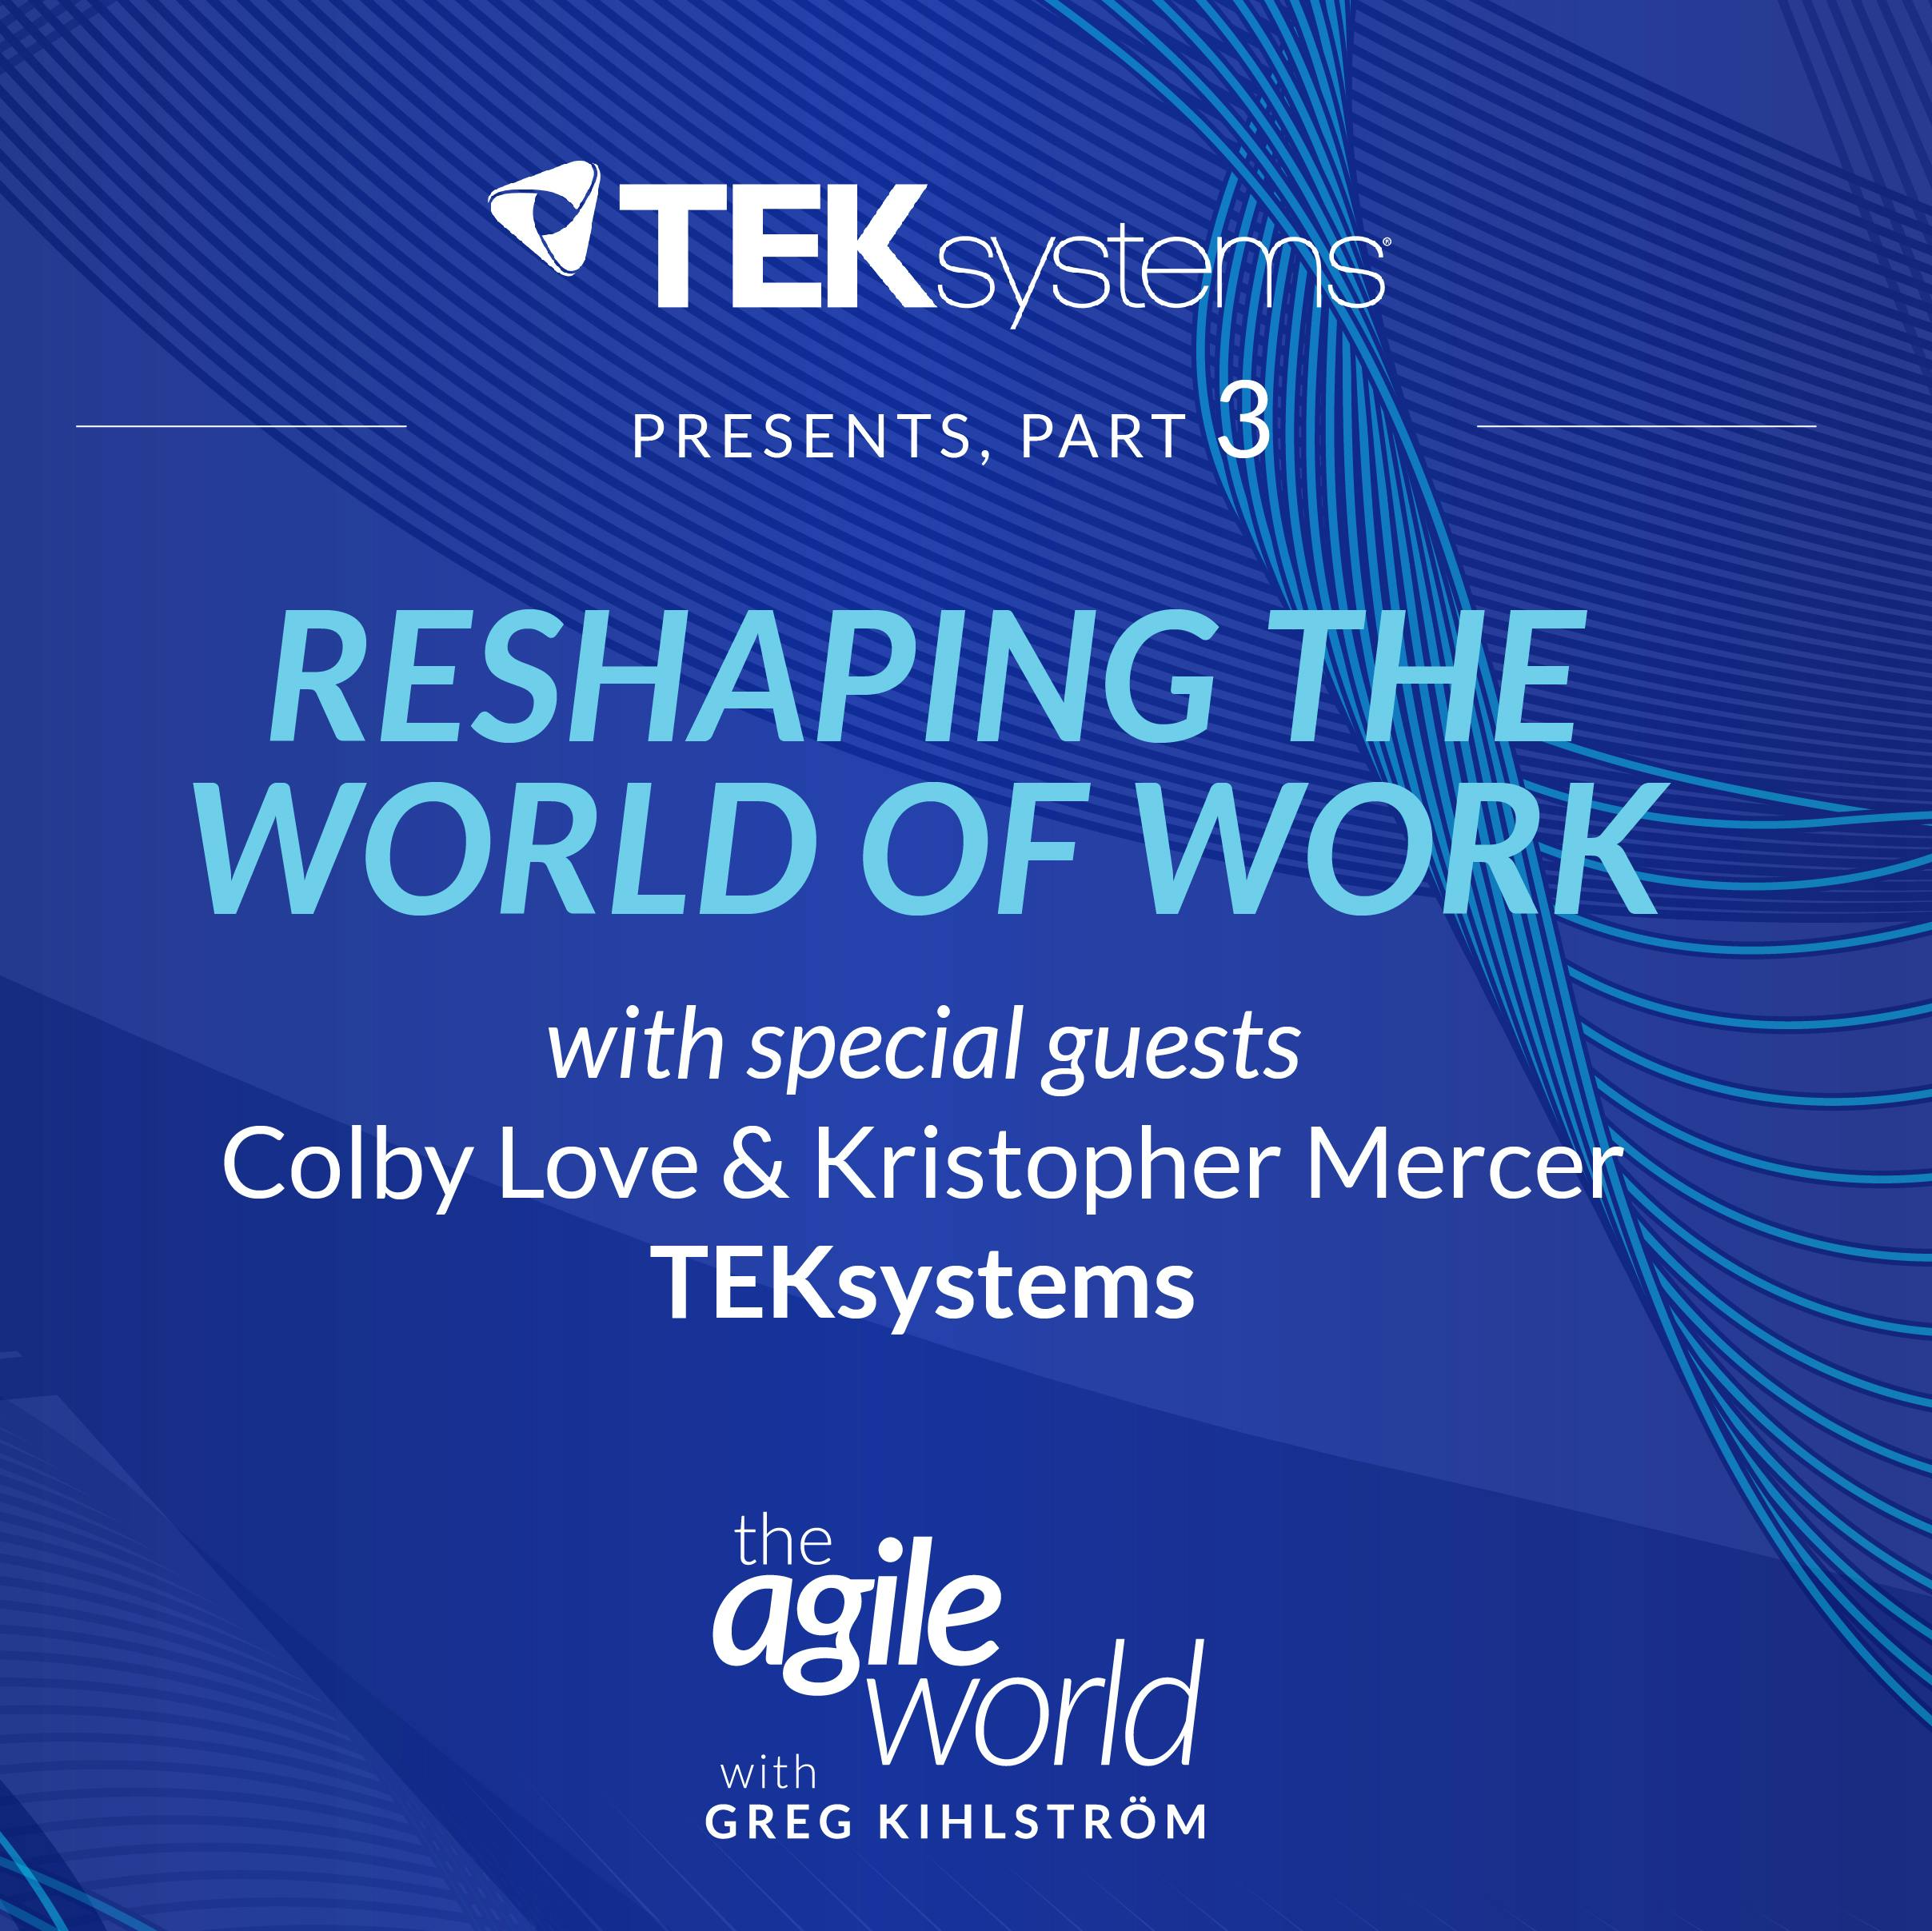 #193: Special Episode: Reshaping the World of Work with TEKsystems featuring and Kris Mercer and Colby Love